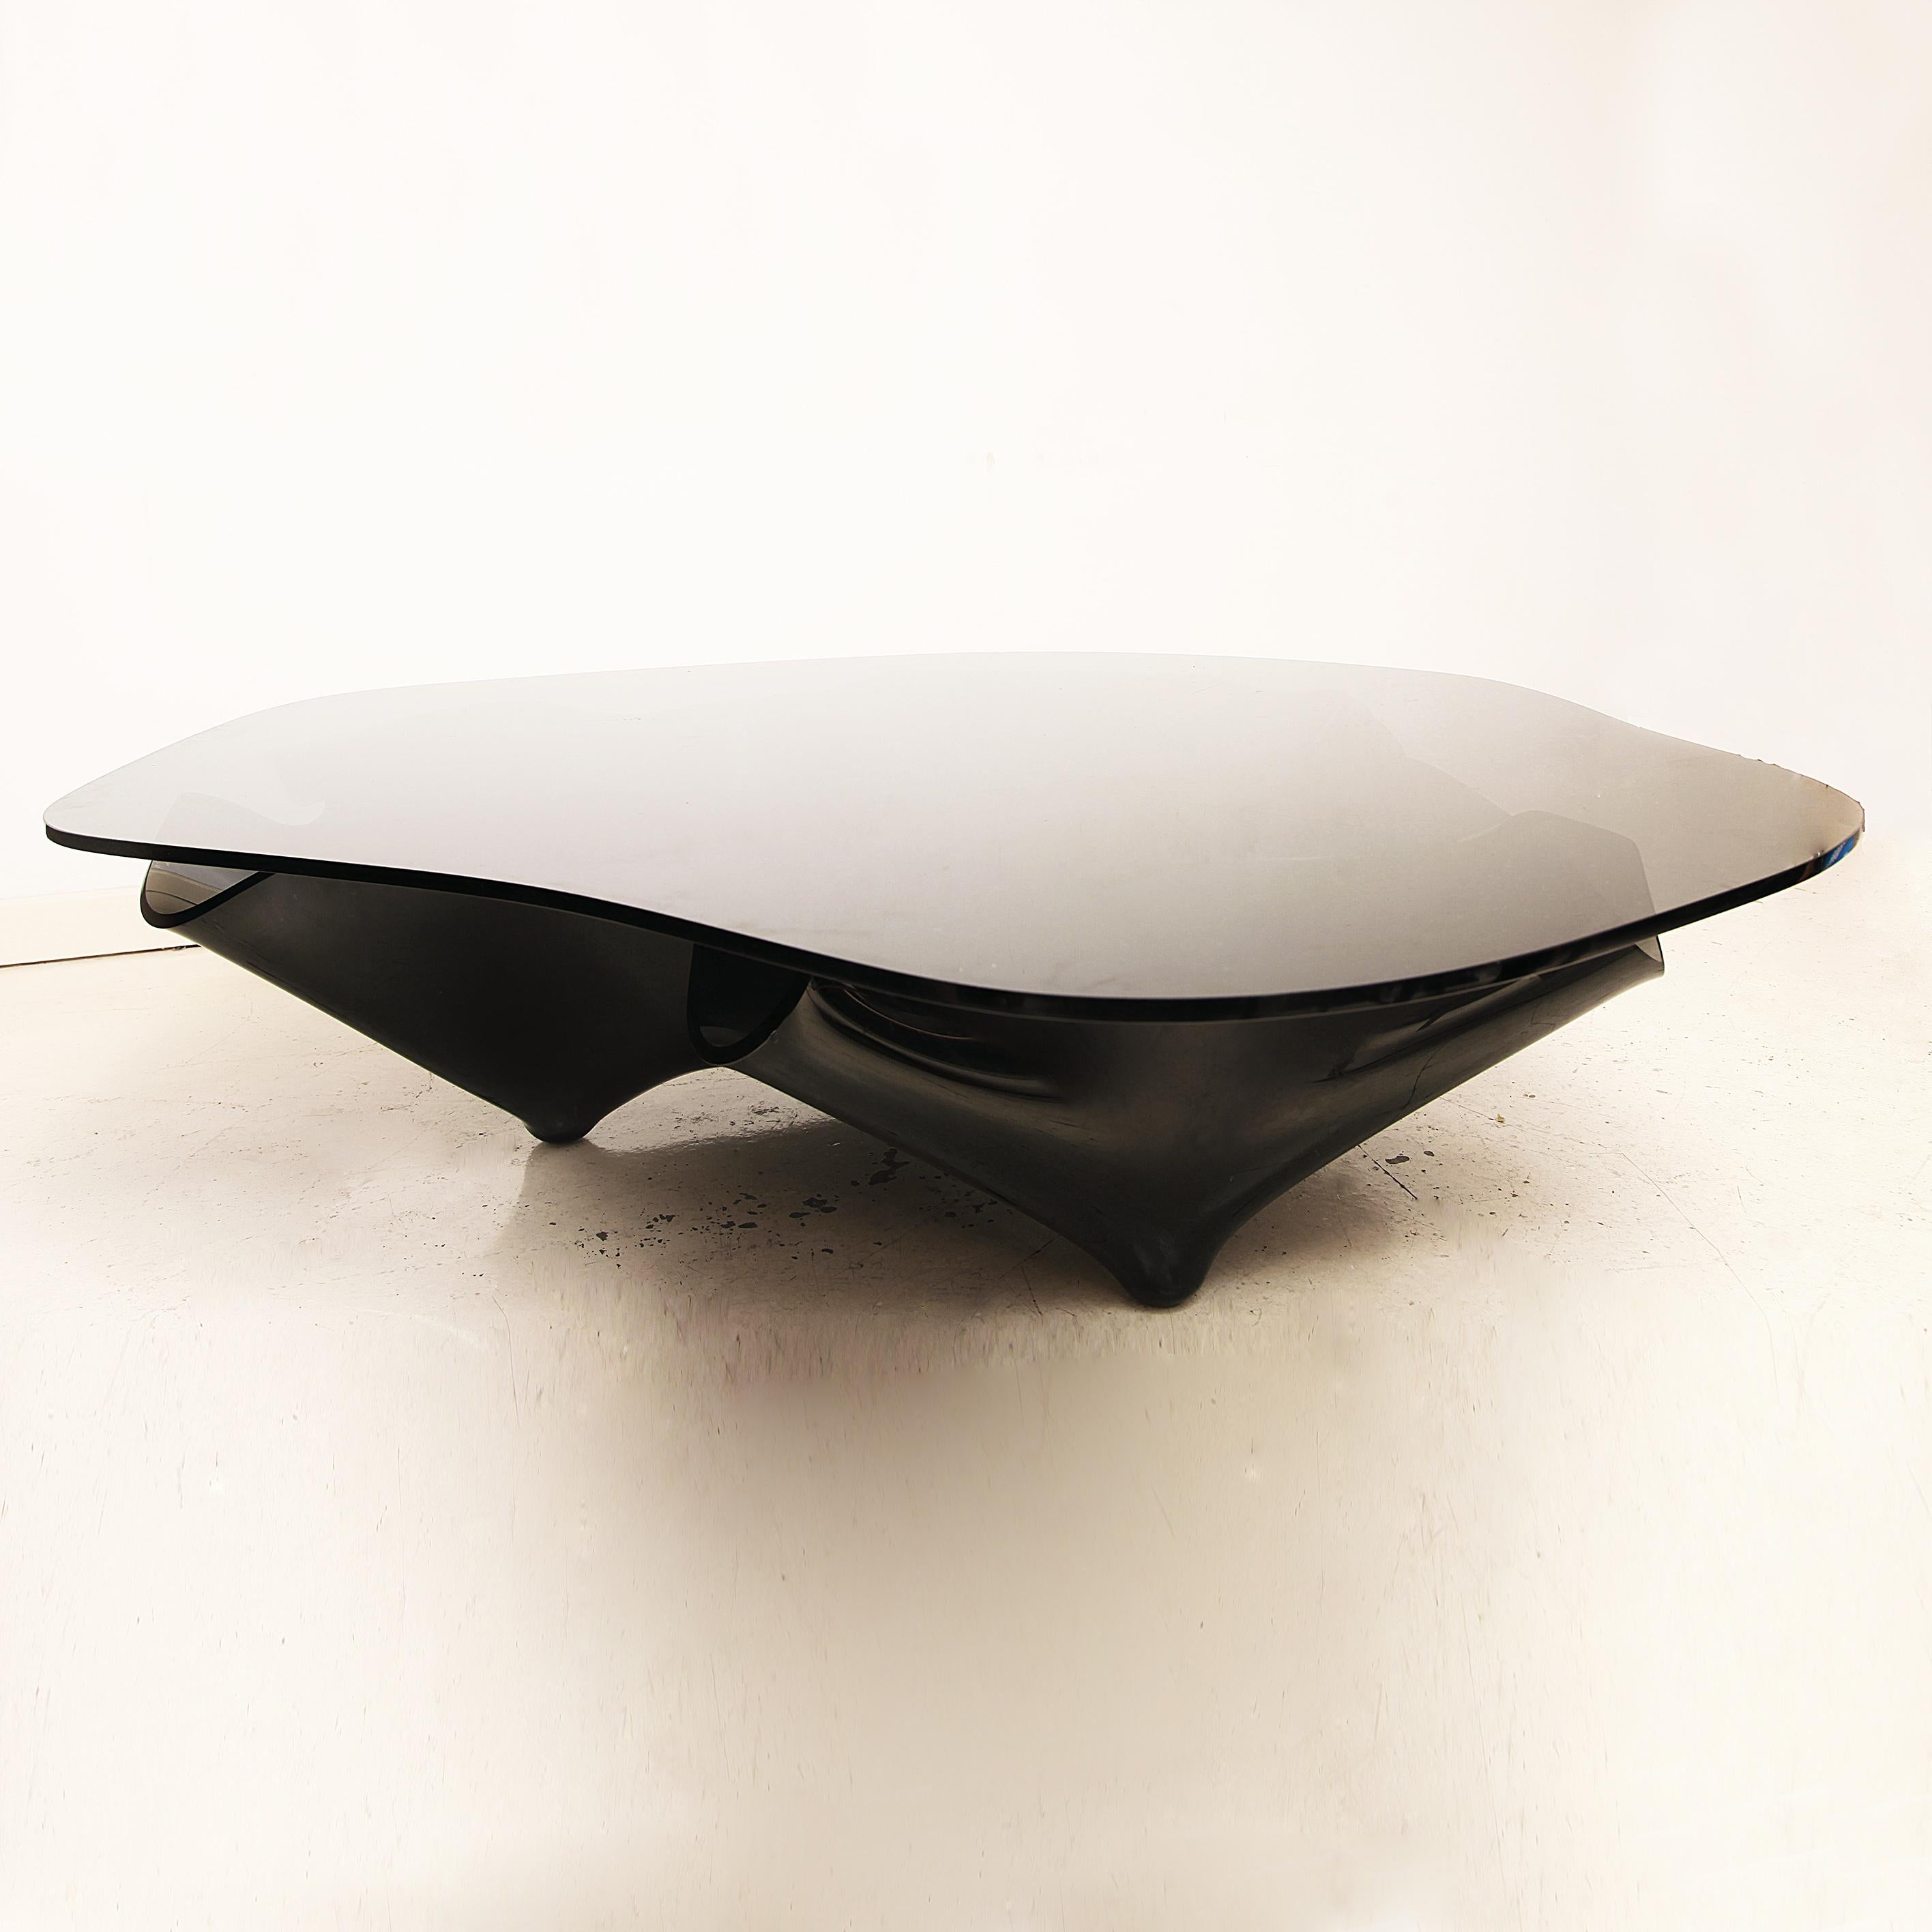 A monumental and rare black glass coffee table with handkerchief shape base and irregular glass top. Imported from USA to London for an estate in Hyde Park. This piece was produced prior to 1992 when Laurel owned Lumen Essence, Inc (L.E.I.) and she